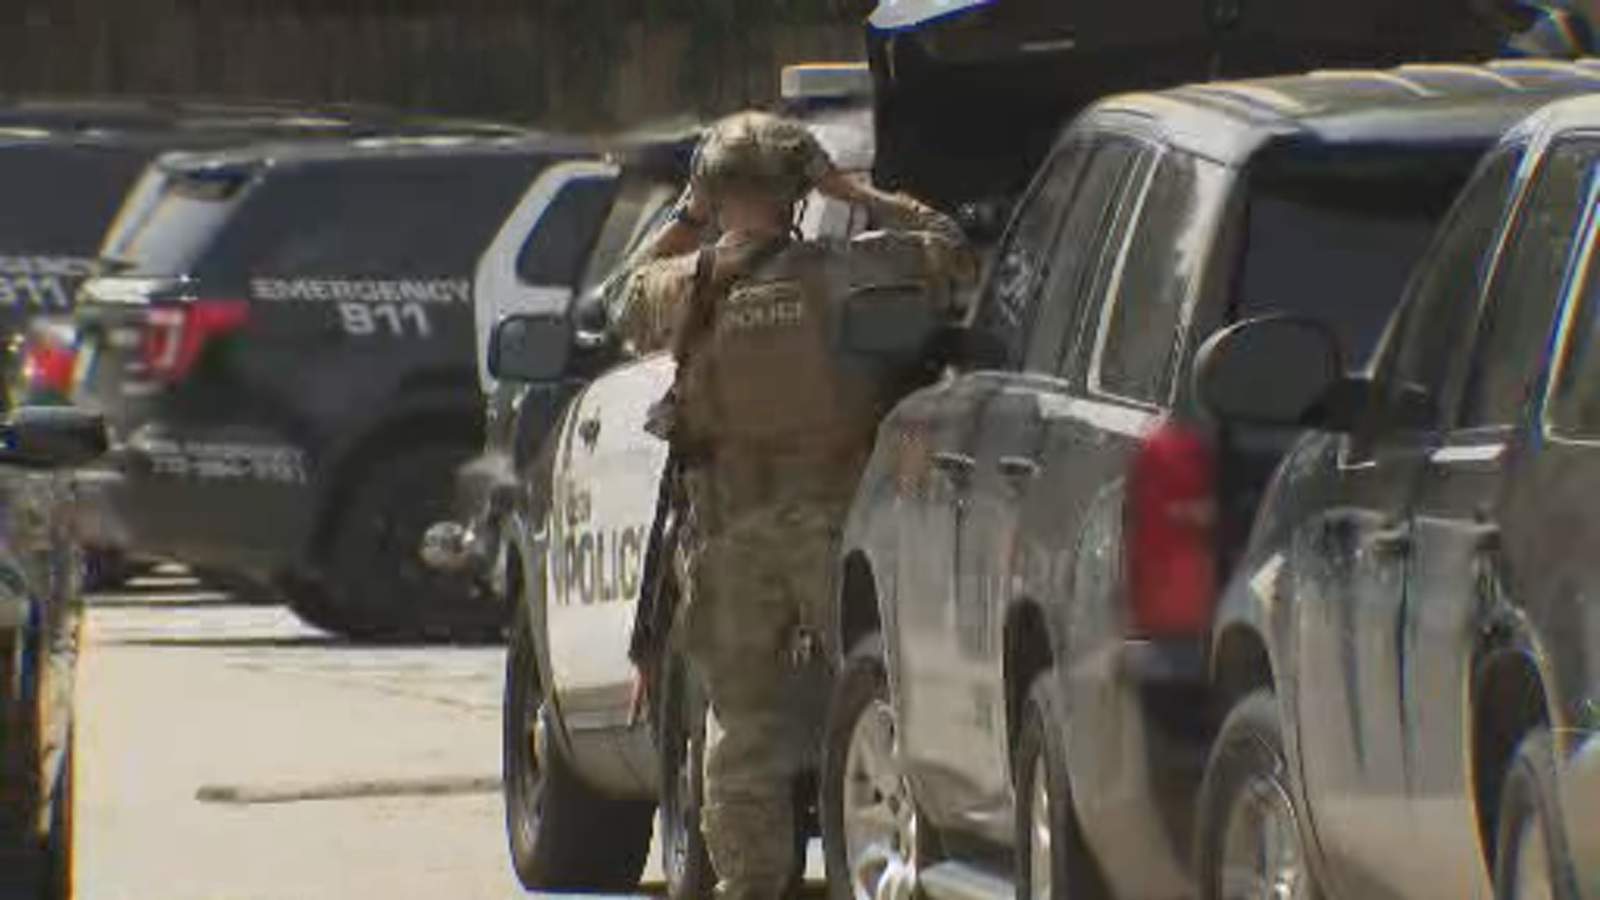 ‘He’s just going through a crisis:’ SWAT scene ends peacefully with military vet in custody